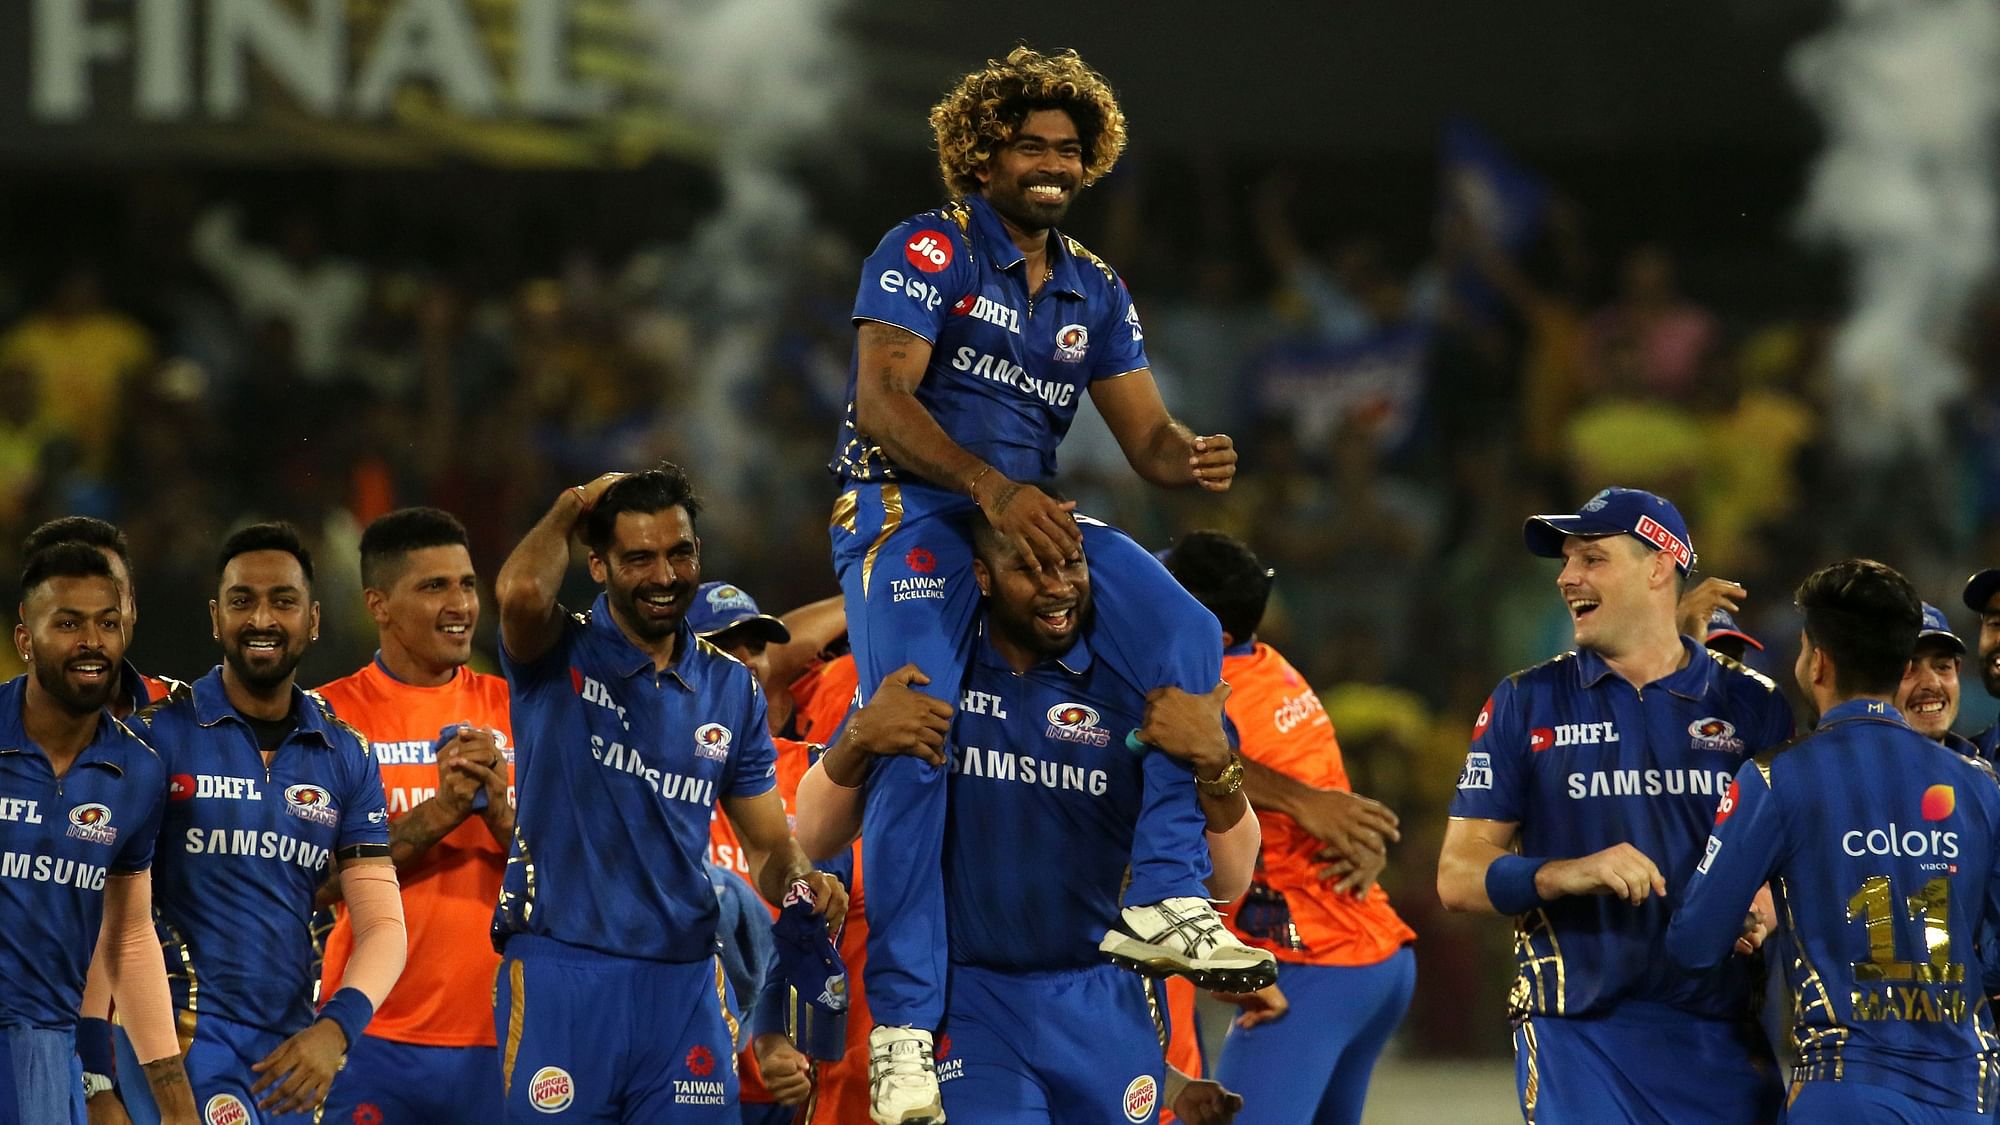 Lasith Malinga has been rated as the greatest bowler in the history of the Indian Premier League (IPL) by his contemporaries.